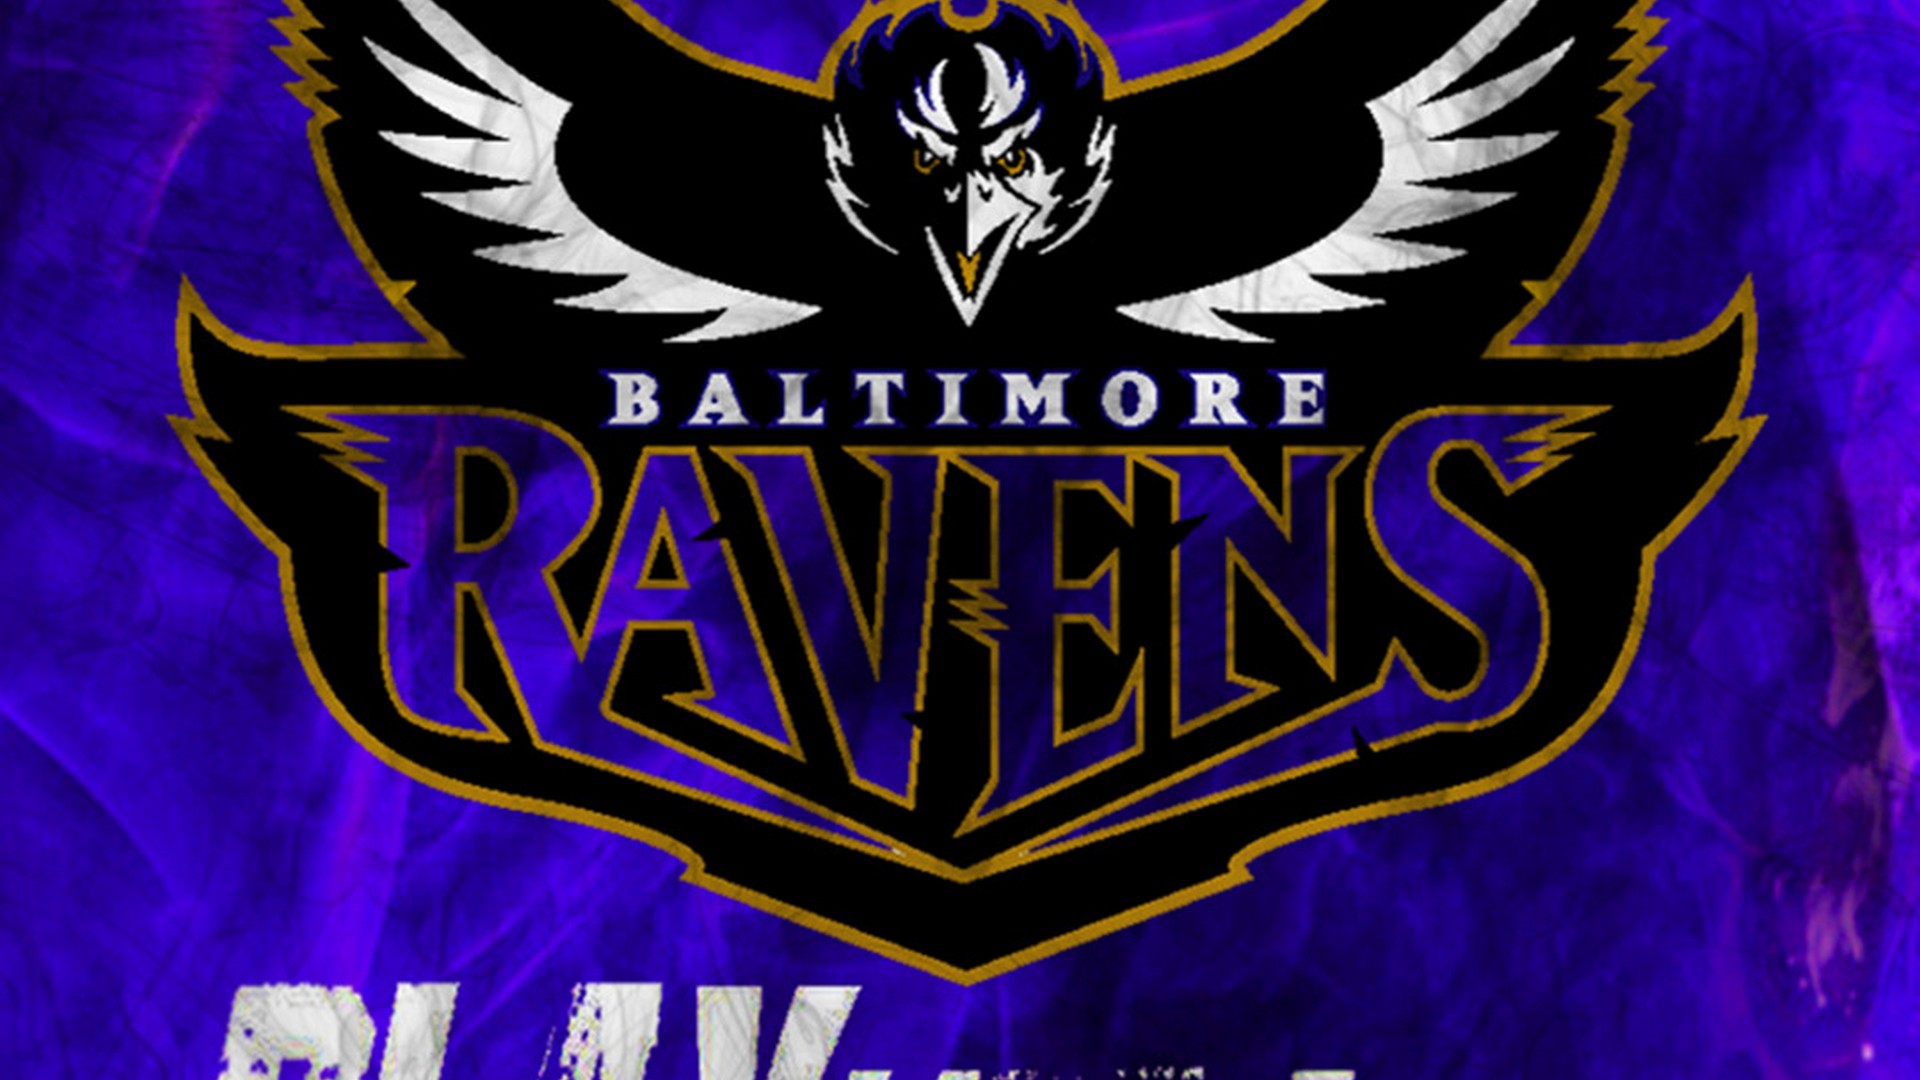 HD Baltimore Ravens Backgrounds 1920x1080